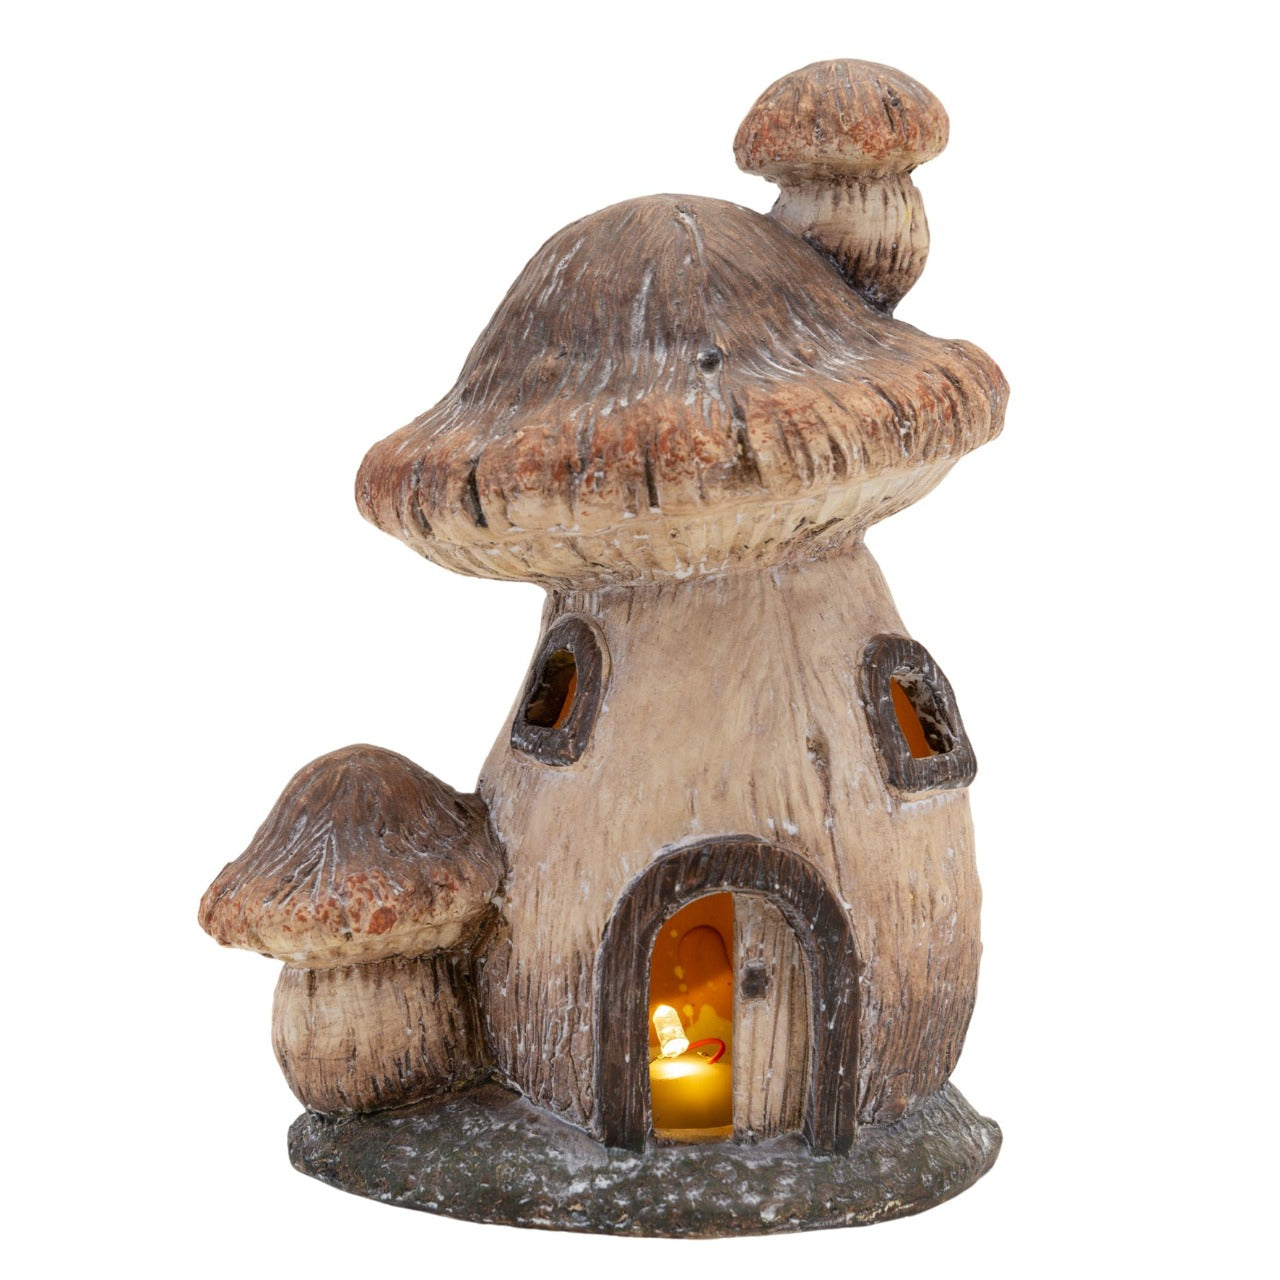 LED Light Up Mushroom Ornaments  Bring some sweet festive cheer to your home with this cute light up mushroom ornament. From Enchanted Forest, part of the 12 Dreams of Christmas Collection - create your winter wonderland.